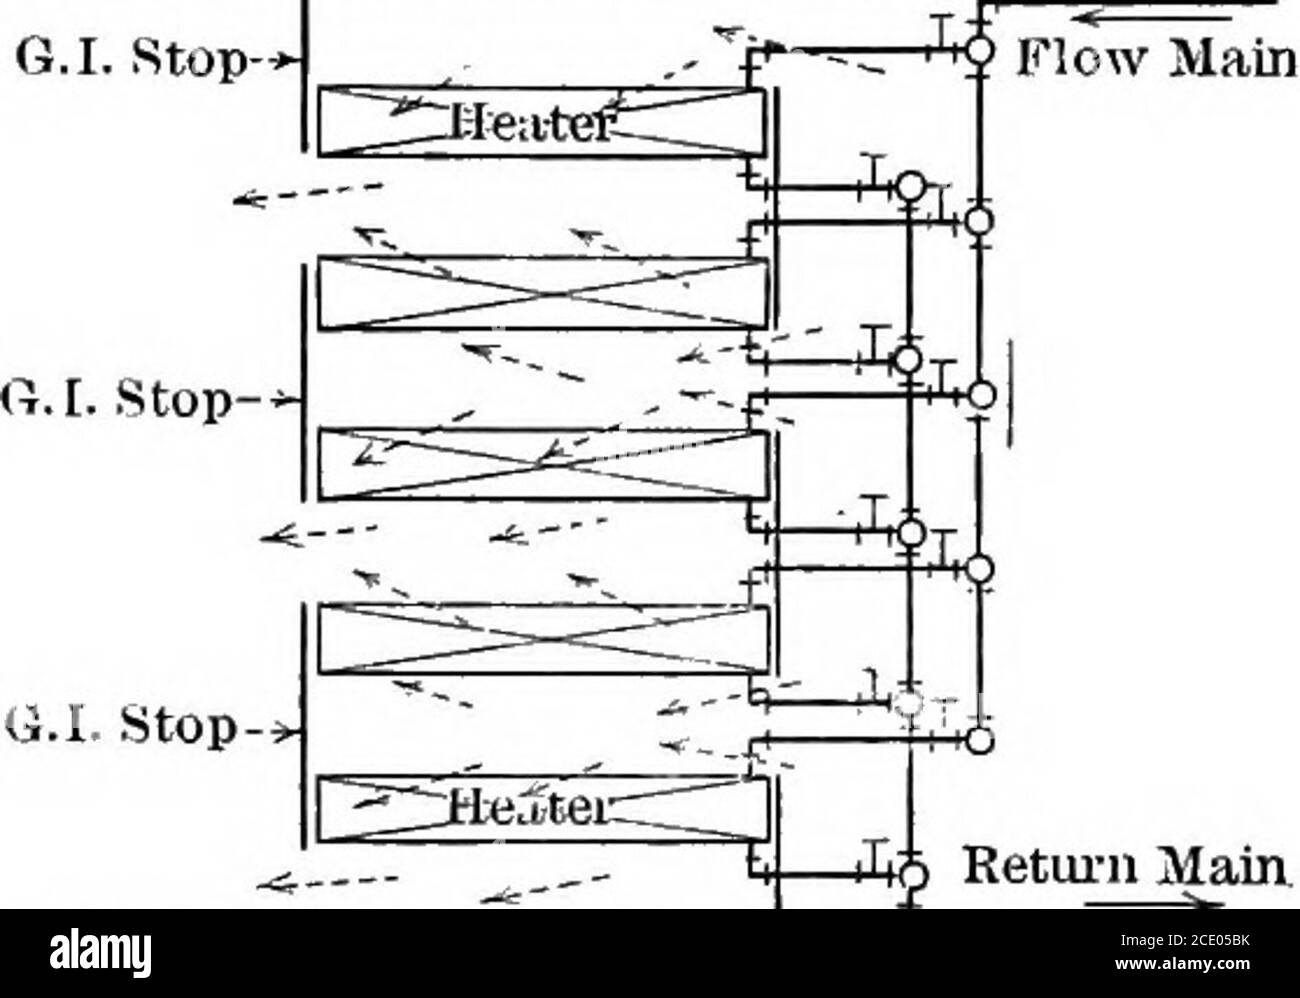 . Power, heating and ventilation ... a treatise for designing and constructing engineers, architects and students . in, by meansof which the volume of water may be reduced, but without com-pletely stopping the circulation in any part of the heater. In both cases the sections are provided with valves in supplyand return for use in case of repairs, or for purposes of regula- FORCED BLAST HEATING AND VENTILATION 227 tion, if desired, when the outside temperature is well above thefreezing point. Efficiency of Hot Water Heaters.—Cast-iron sections of gooddepth, used as shown in Figs. 154 and 155, a Stock Photo